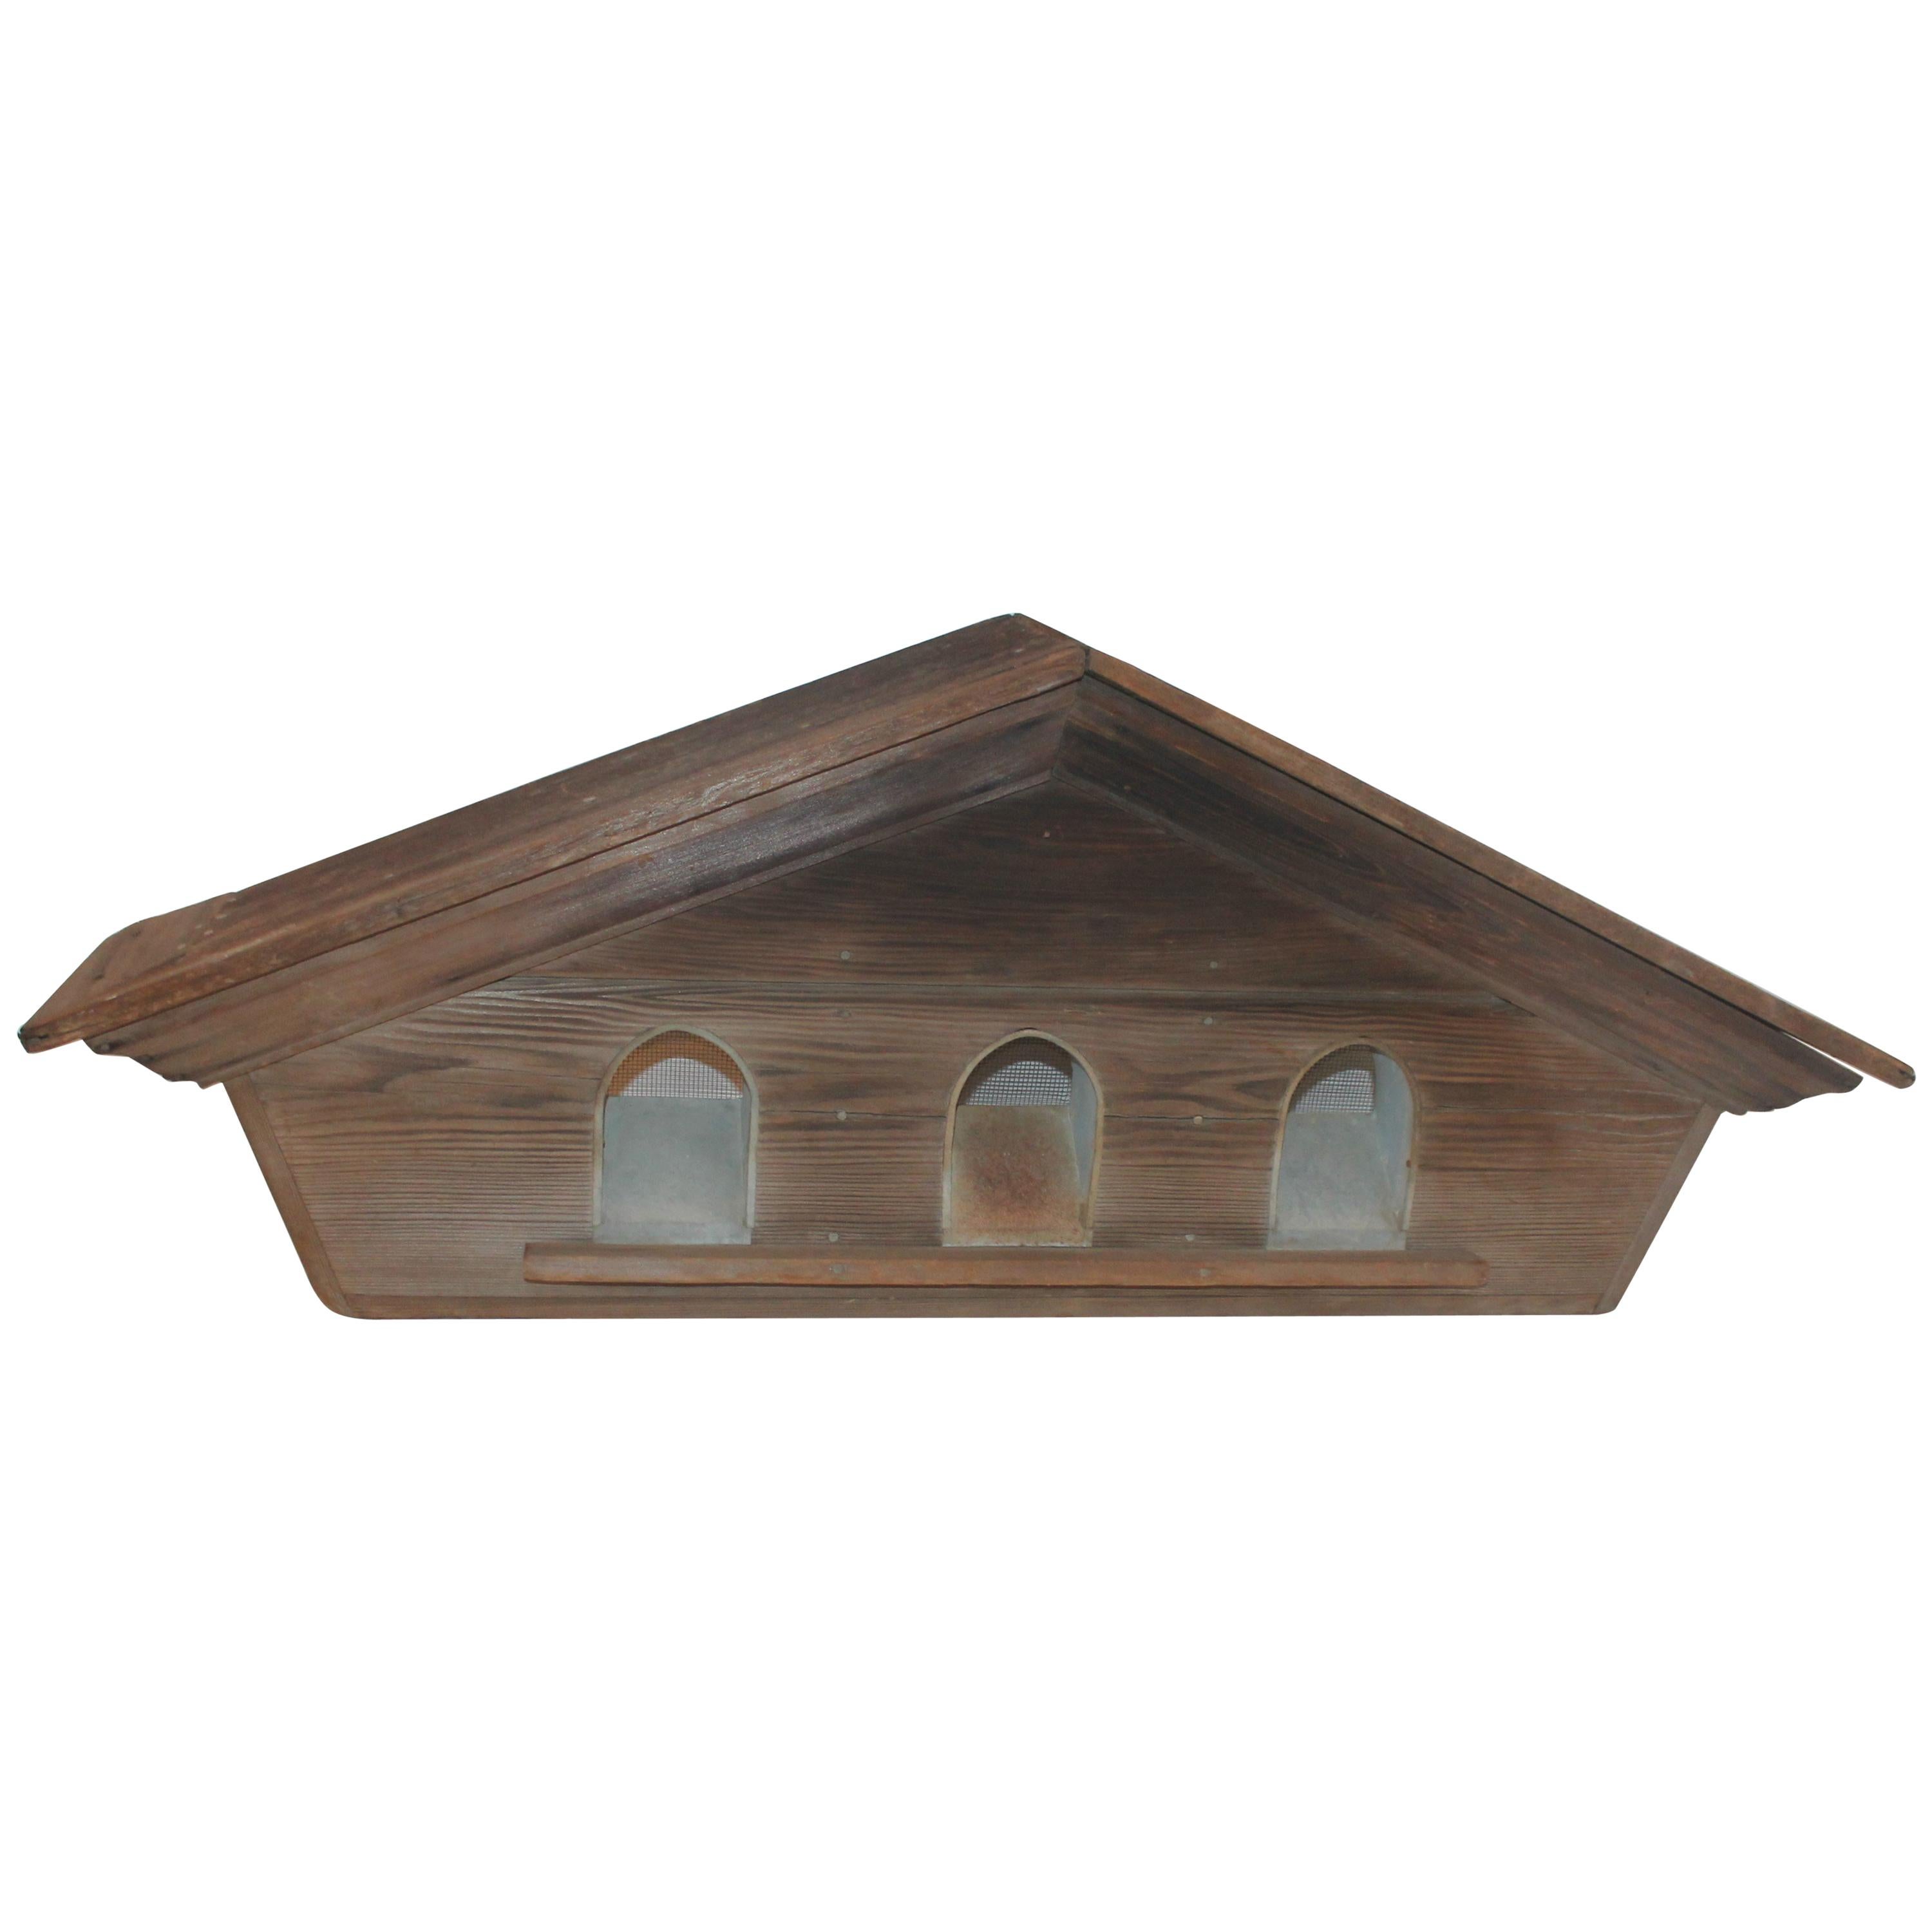 Architectural Cupola with Martin Bird House within from a Barn